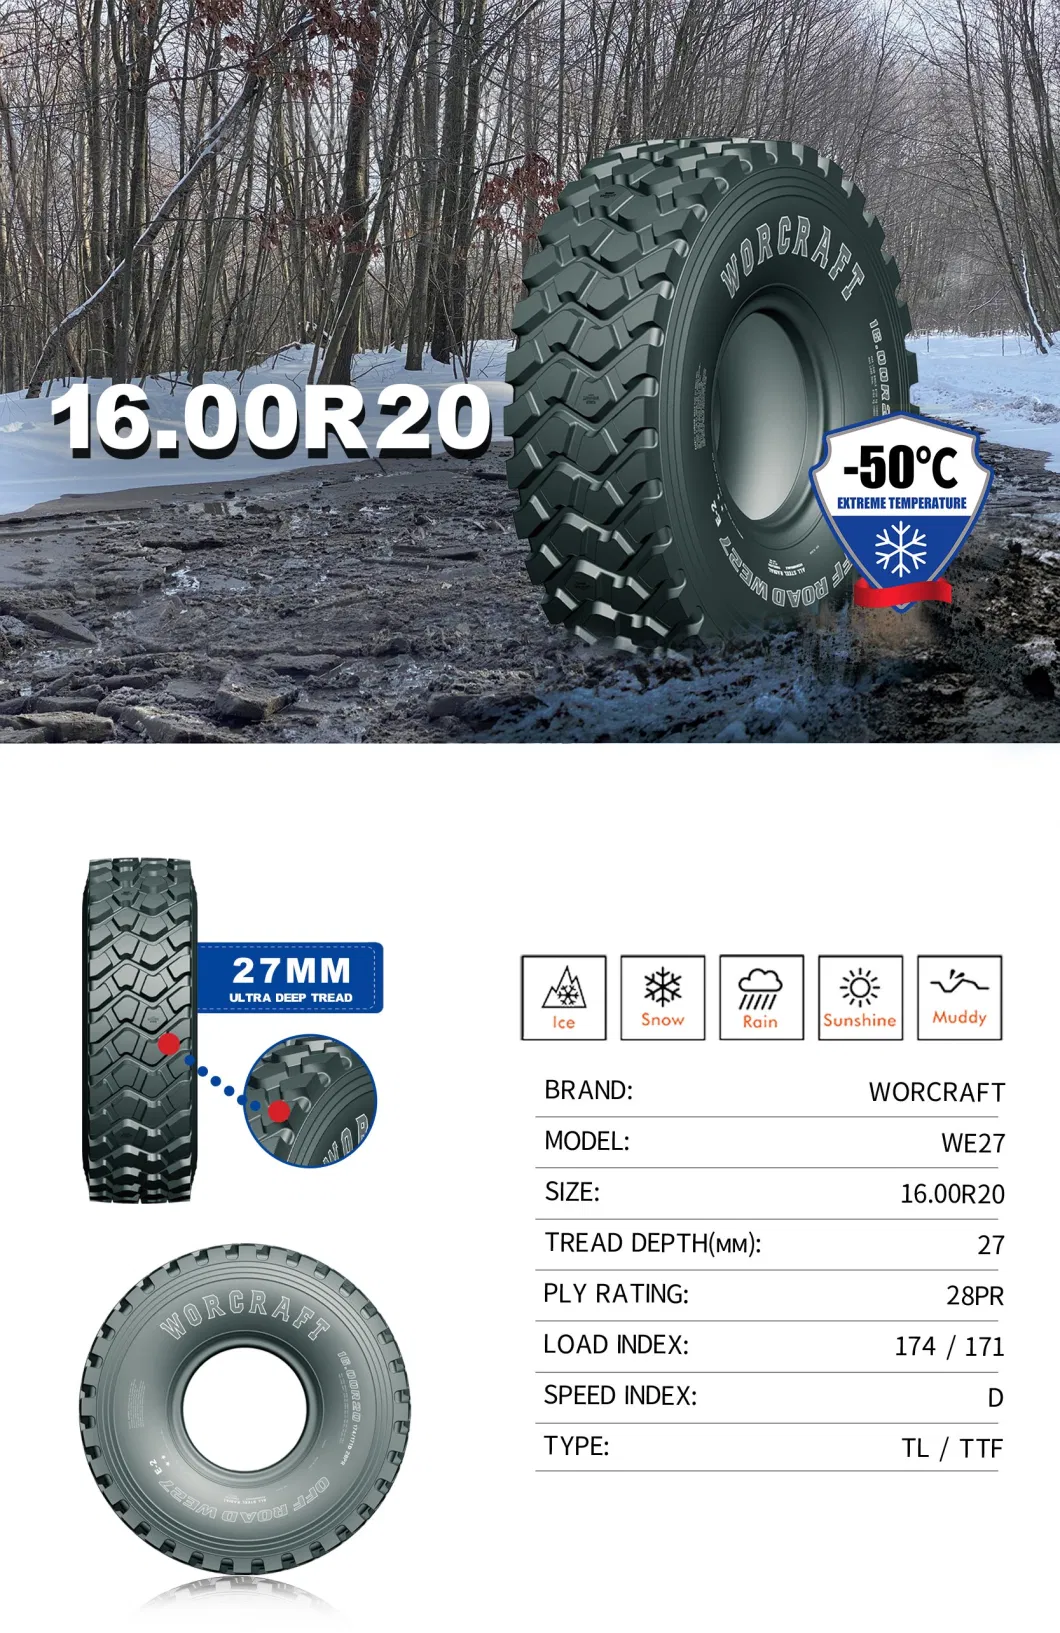 Worcraft Brand Double Coin Kama Tyre 425/85r21 1600r20 for Russian Market